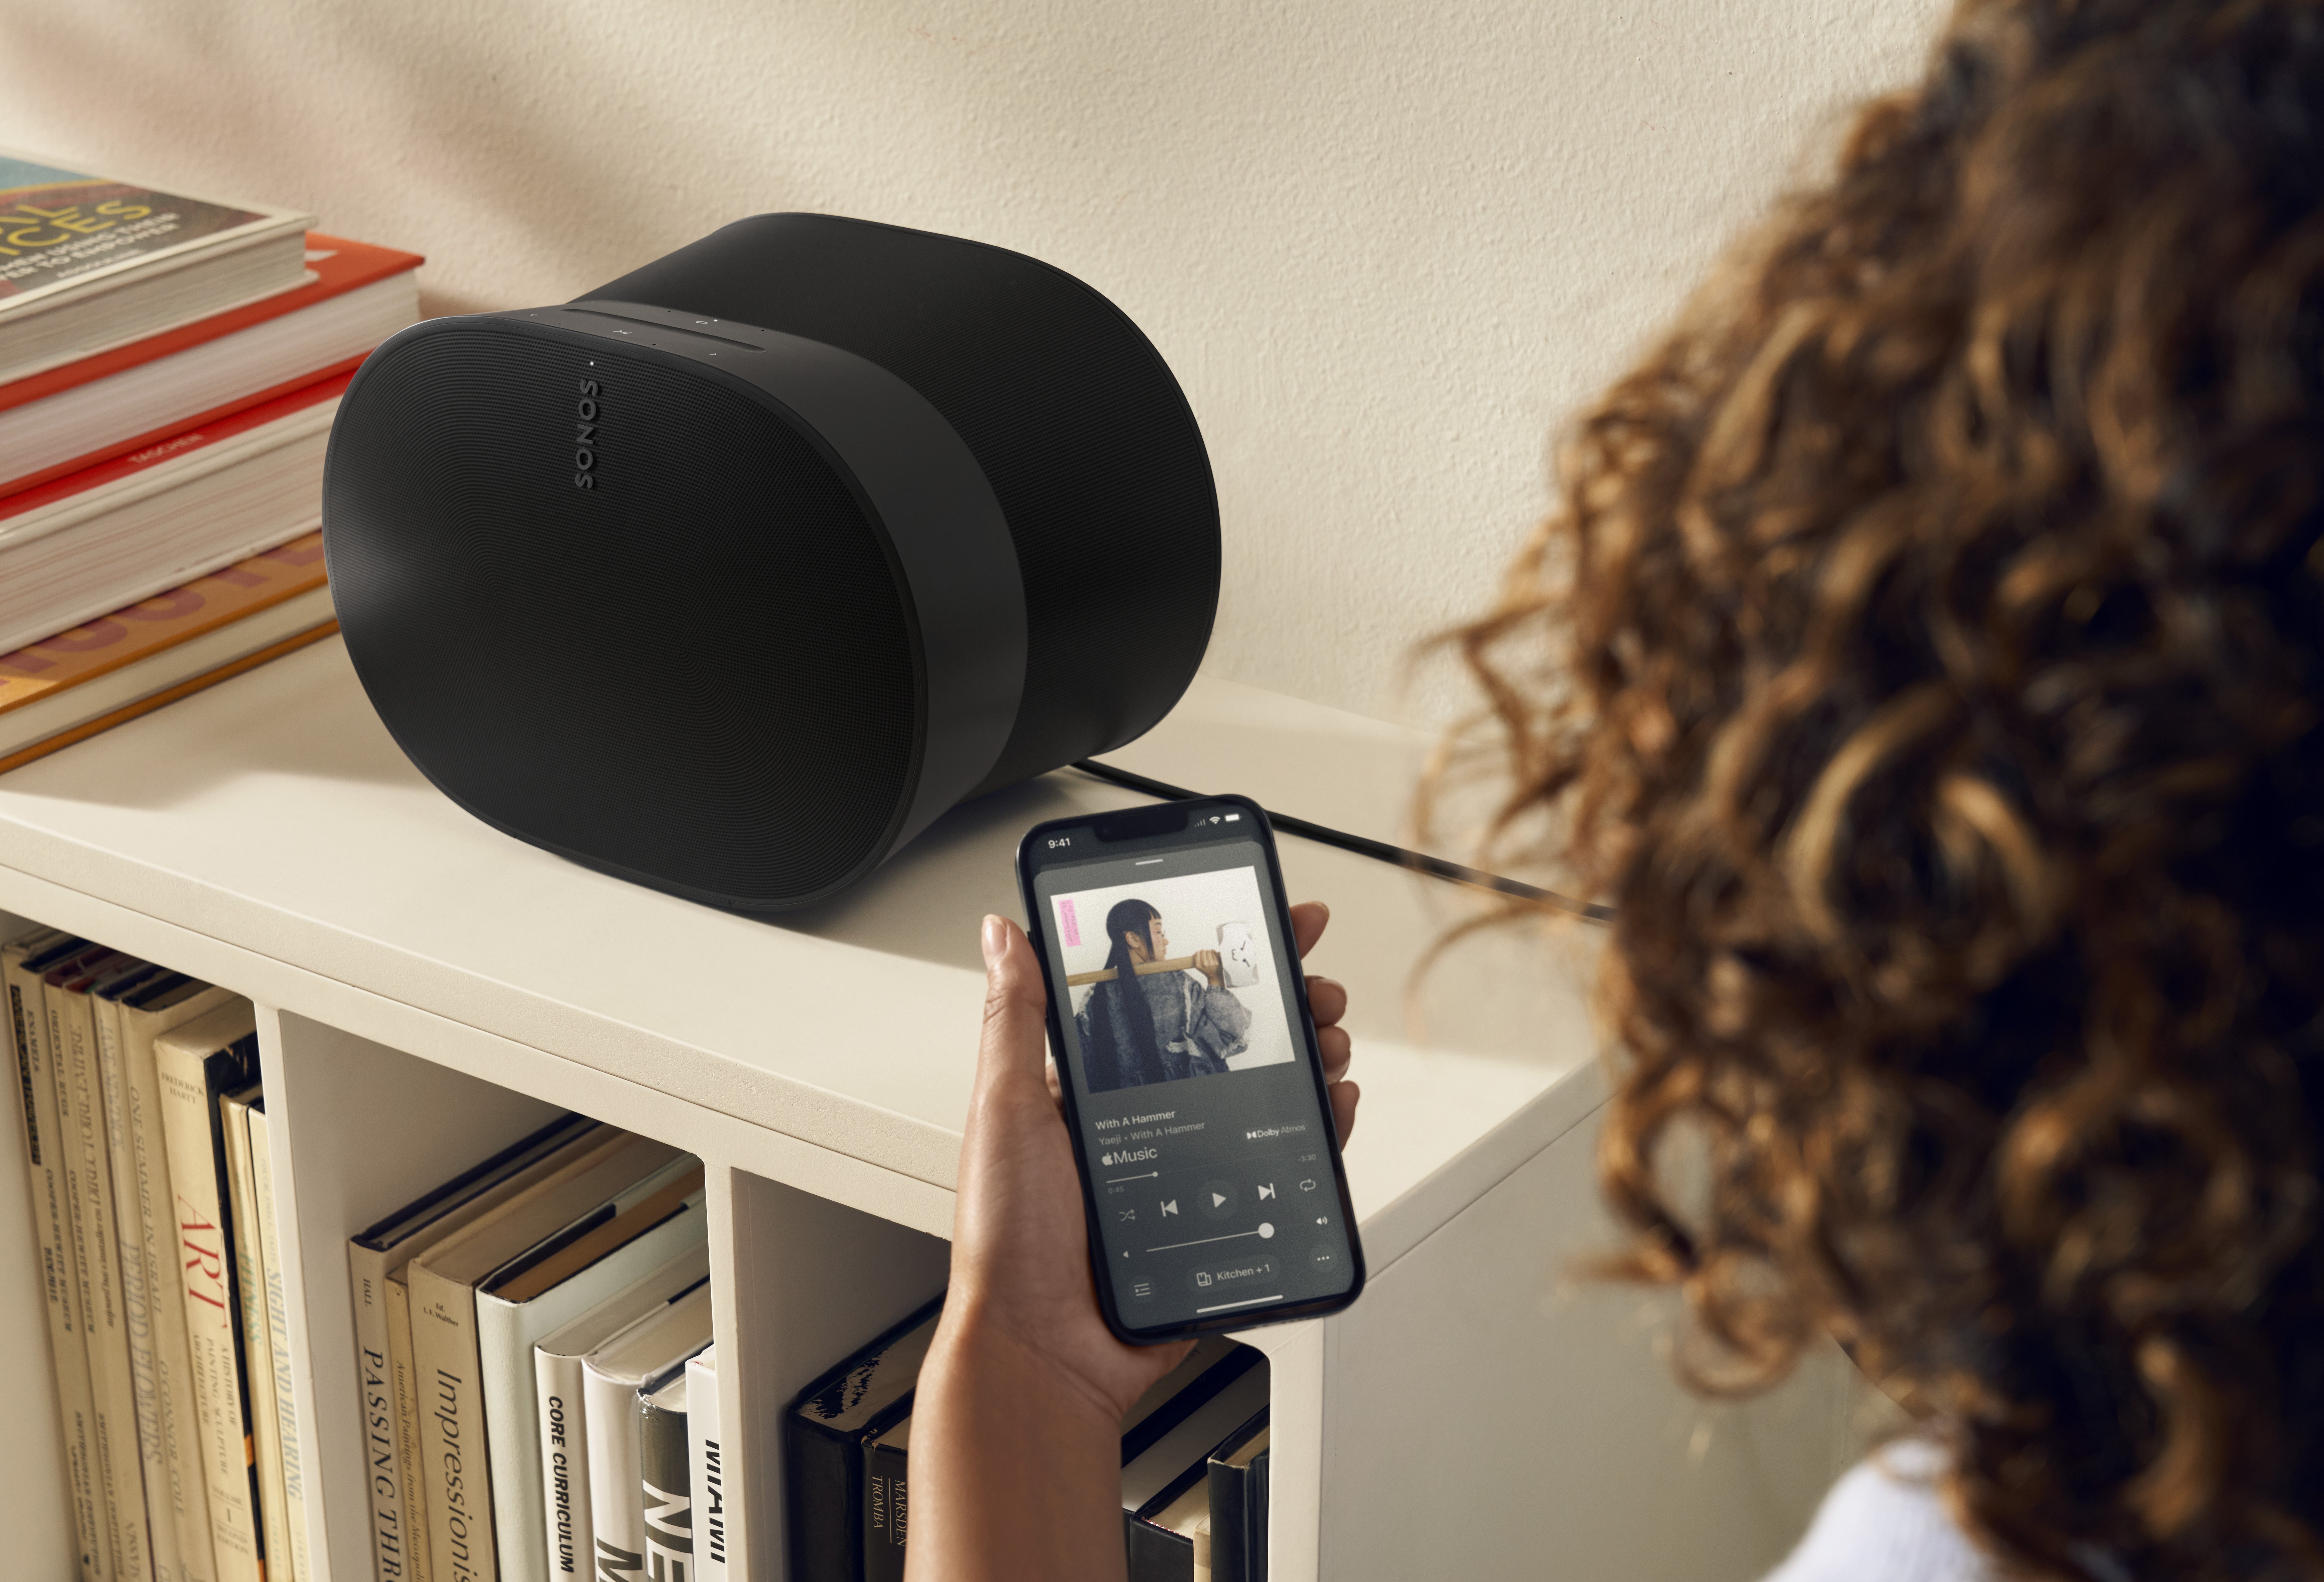 A person points their Sonos app shown on a smartphone at a Sonos speaker sitting on a shelf.